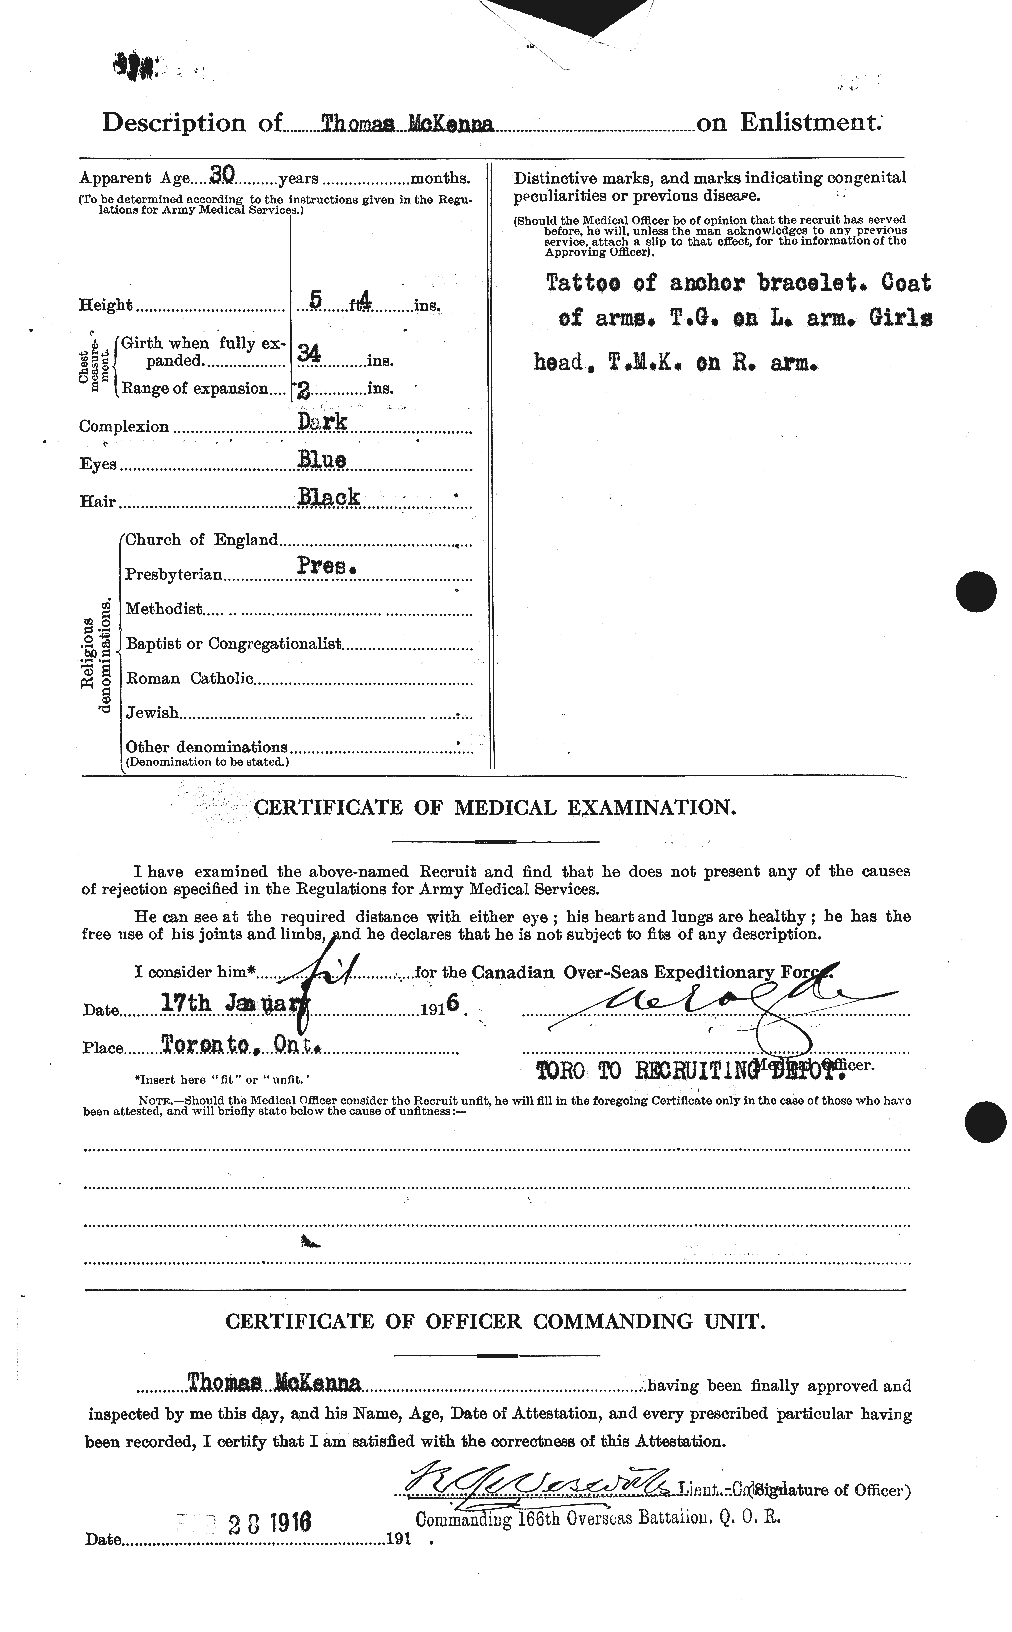 Personnel Records of the First World War - CEF 528663b